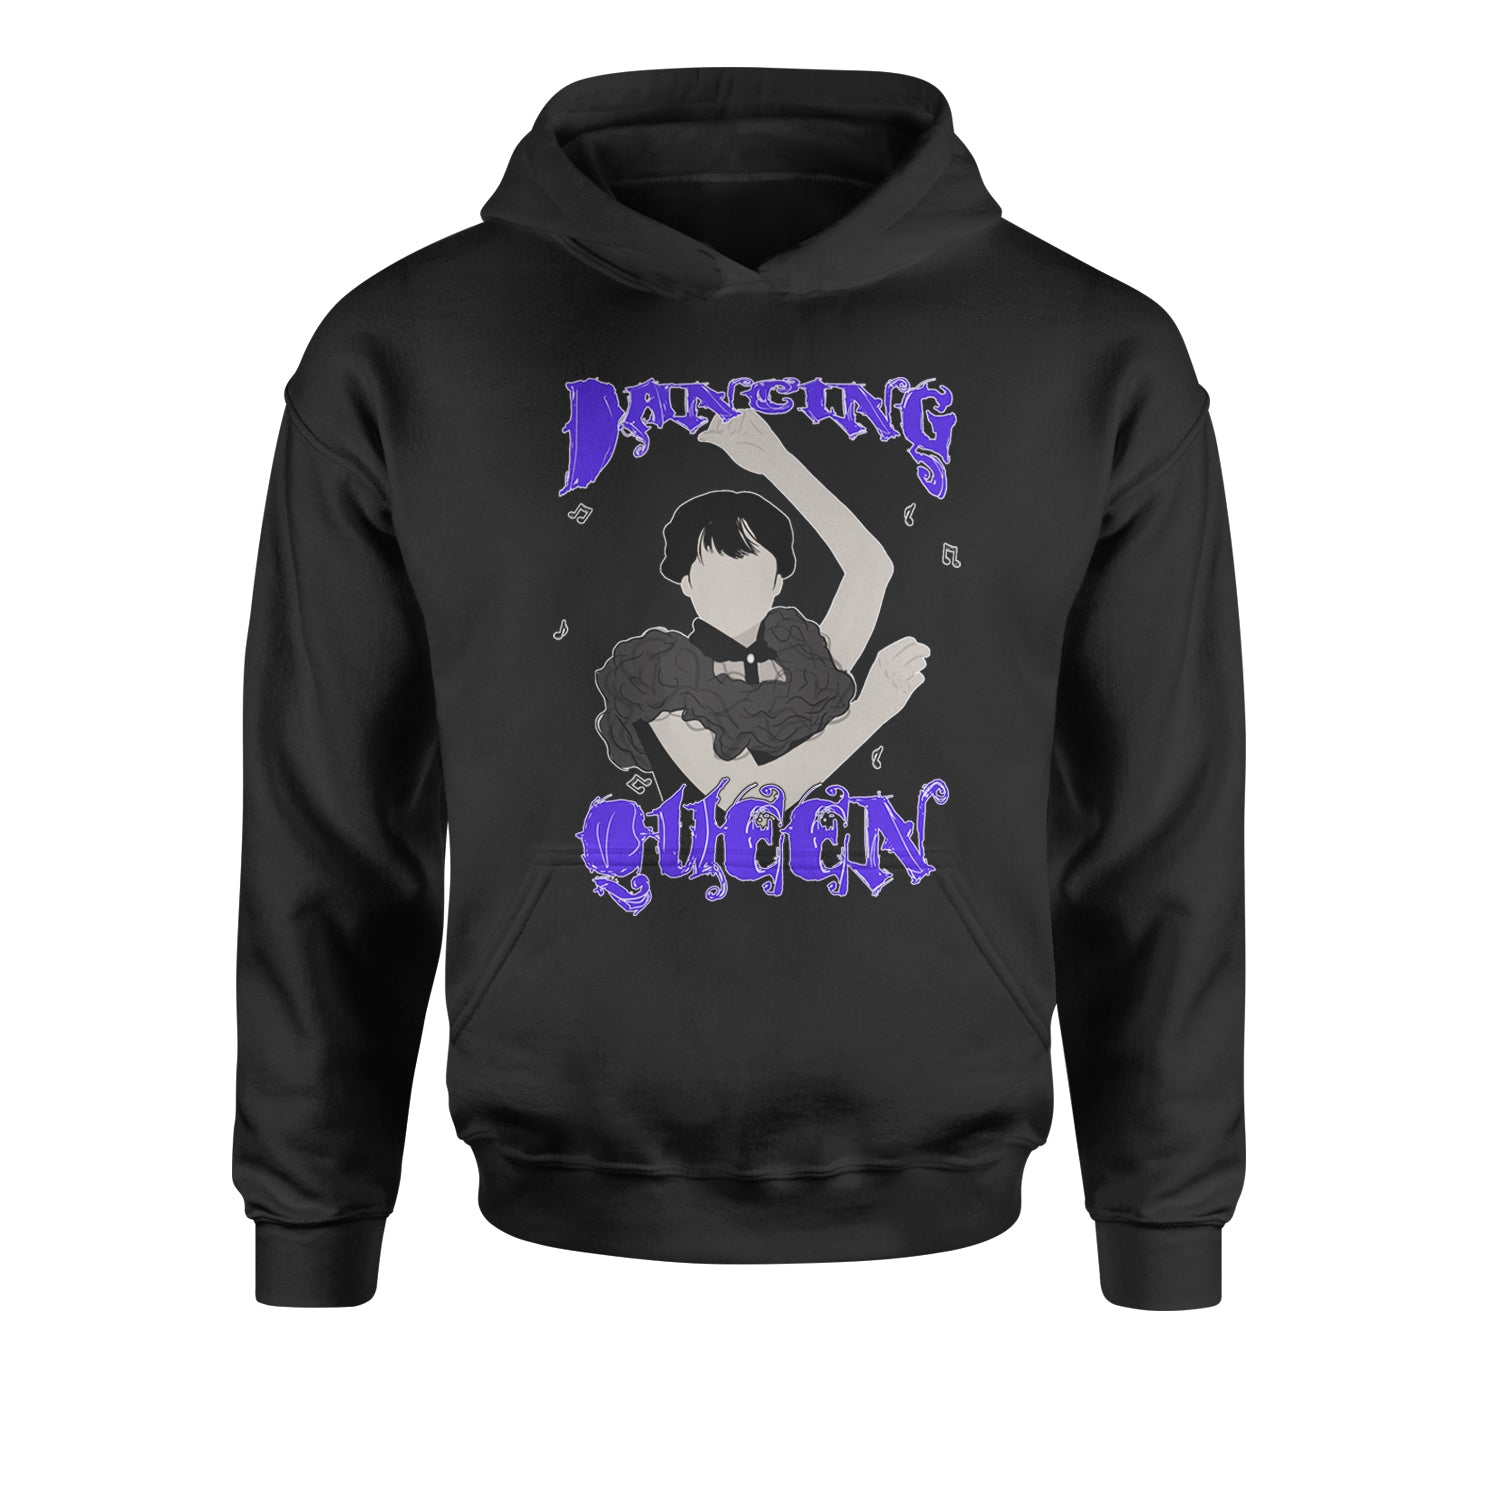 Wednesday Dancing Queen Youth-Sized Hoodie black, On, we, wear, wednesdays by Expression Tees